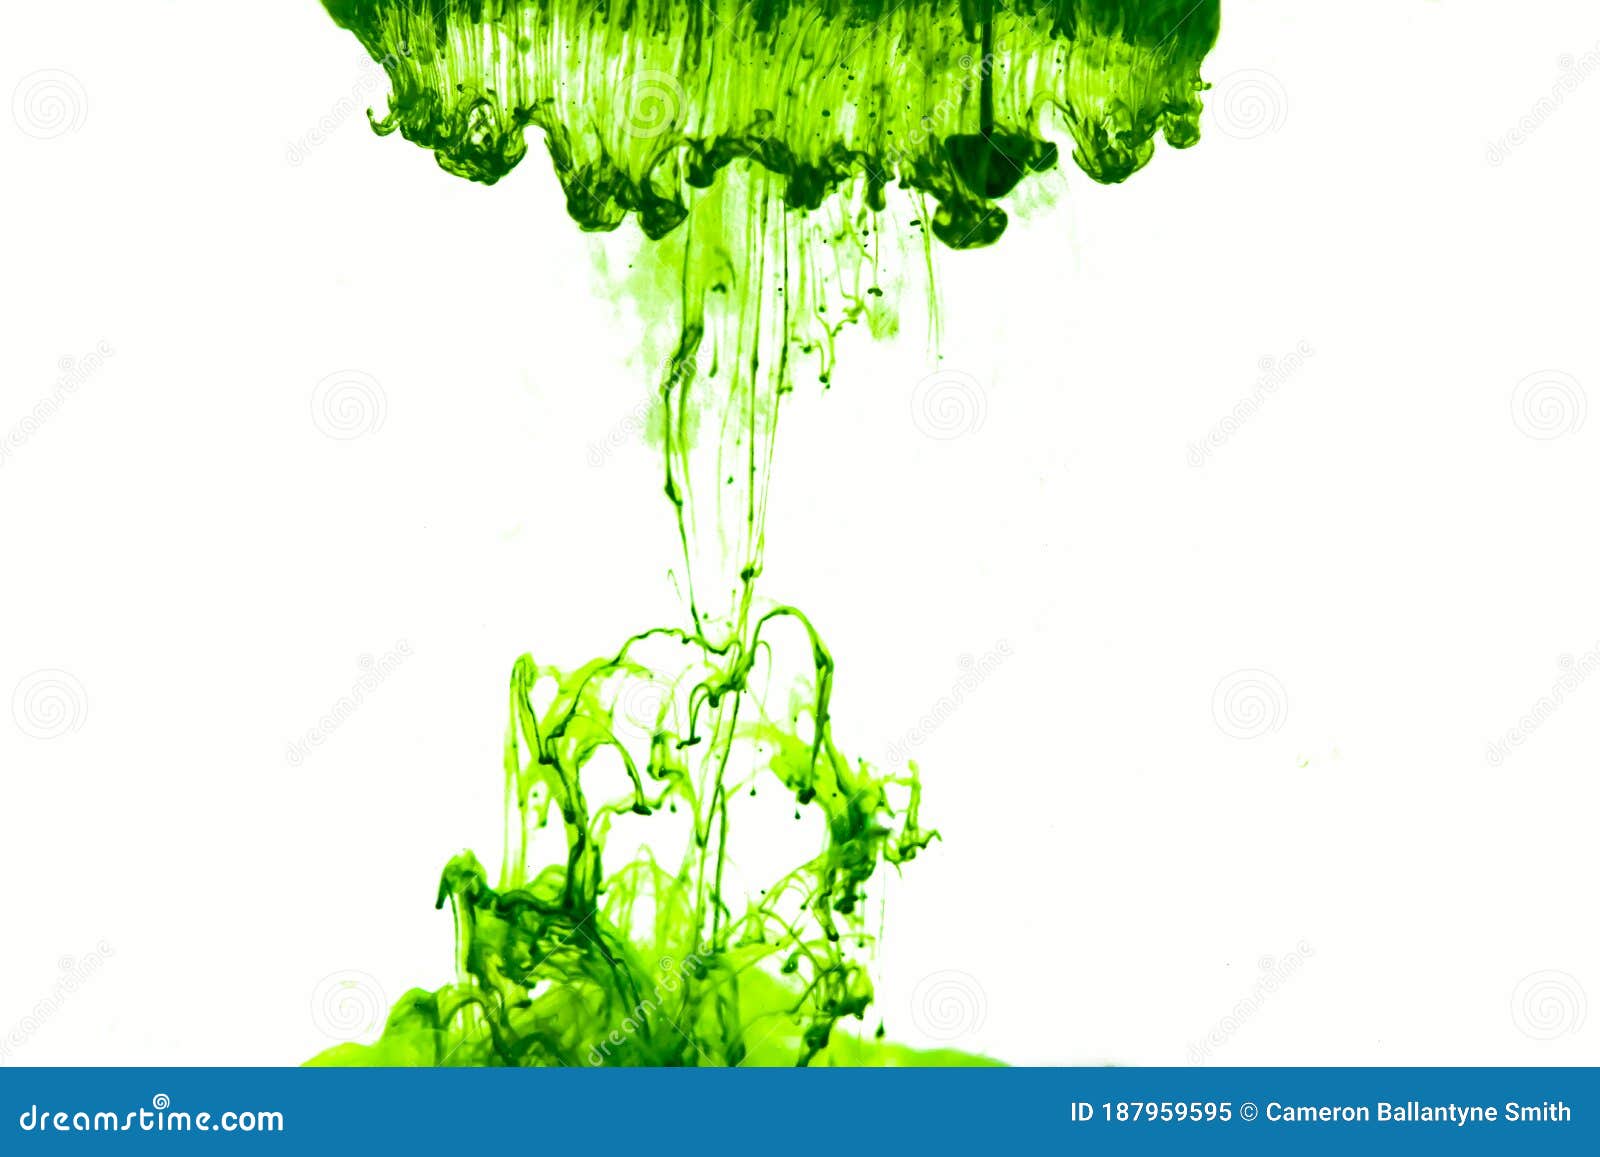 Green Ink in Water with White Background Stock Image - Image of ...